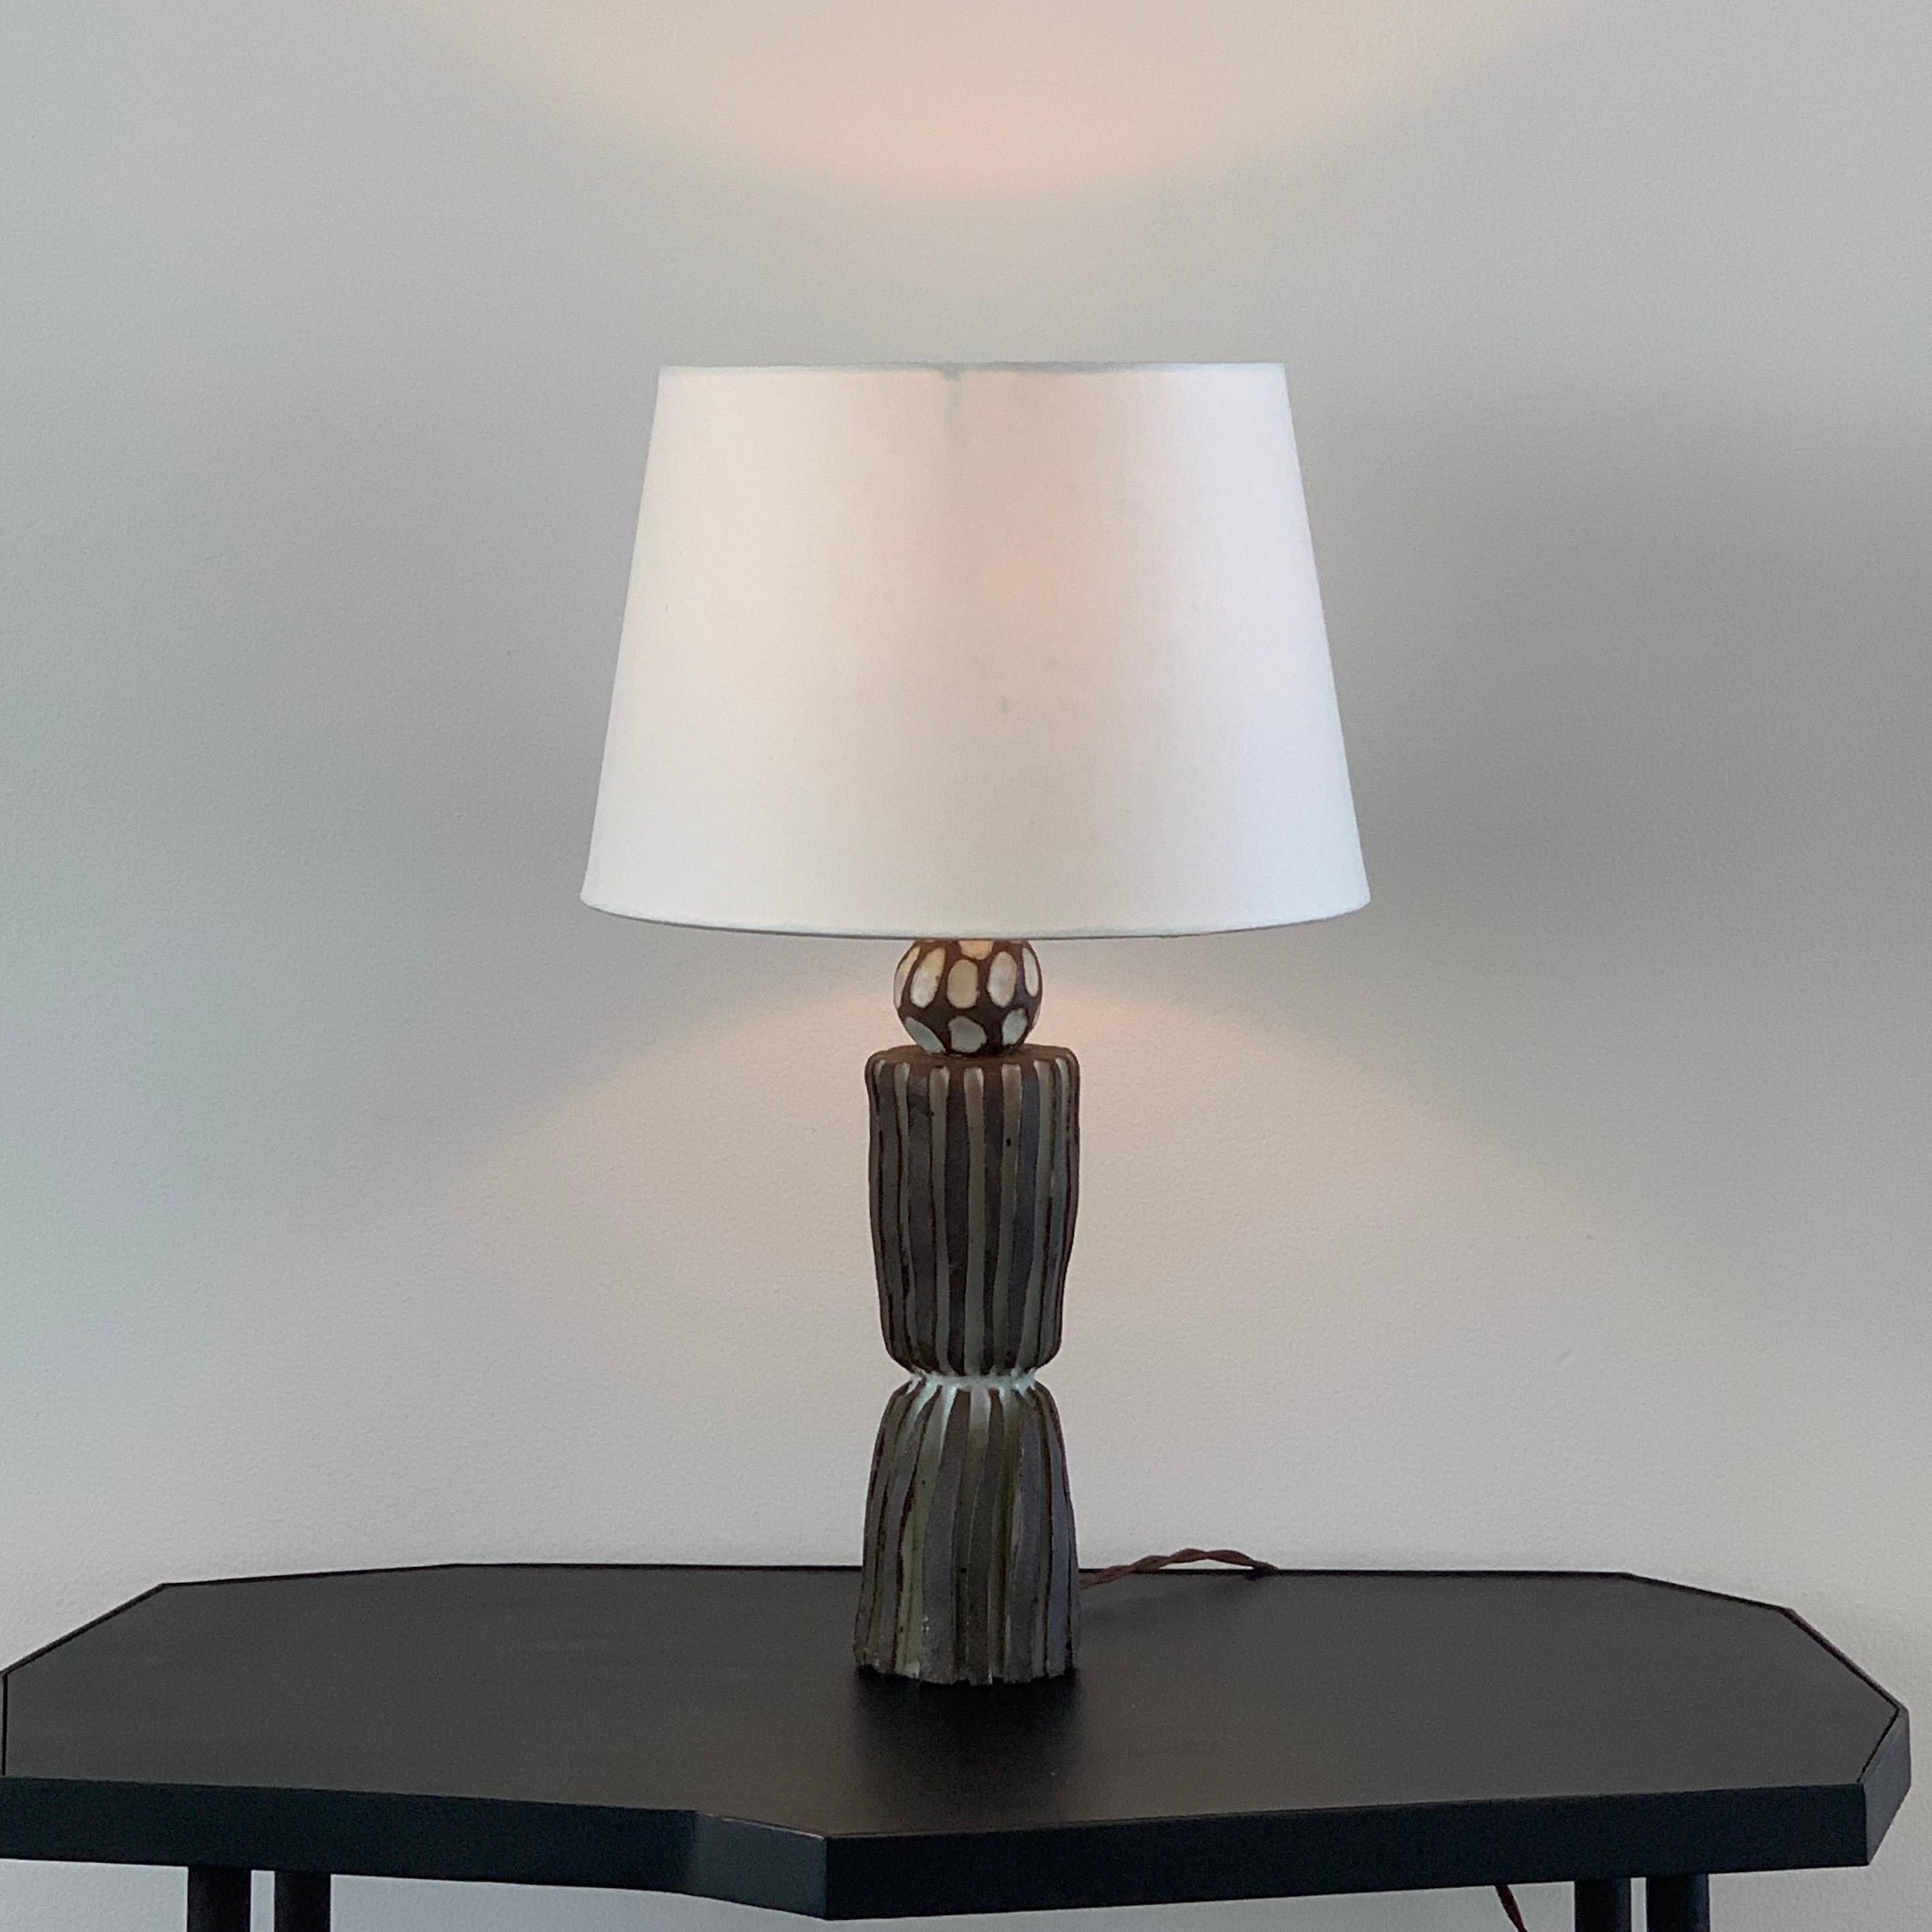 Grooved 'Sillons' Pottery Lamp with Parchment Shade by Design Frères In New Condition For Sale In Los Angeles, CA